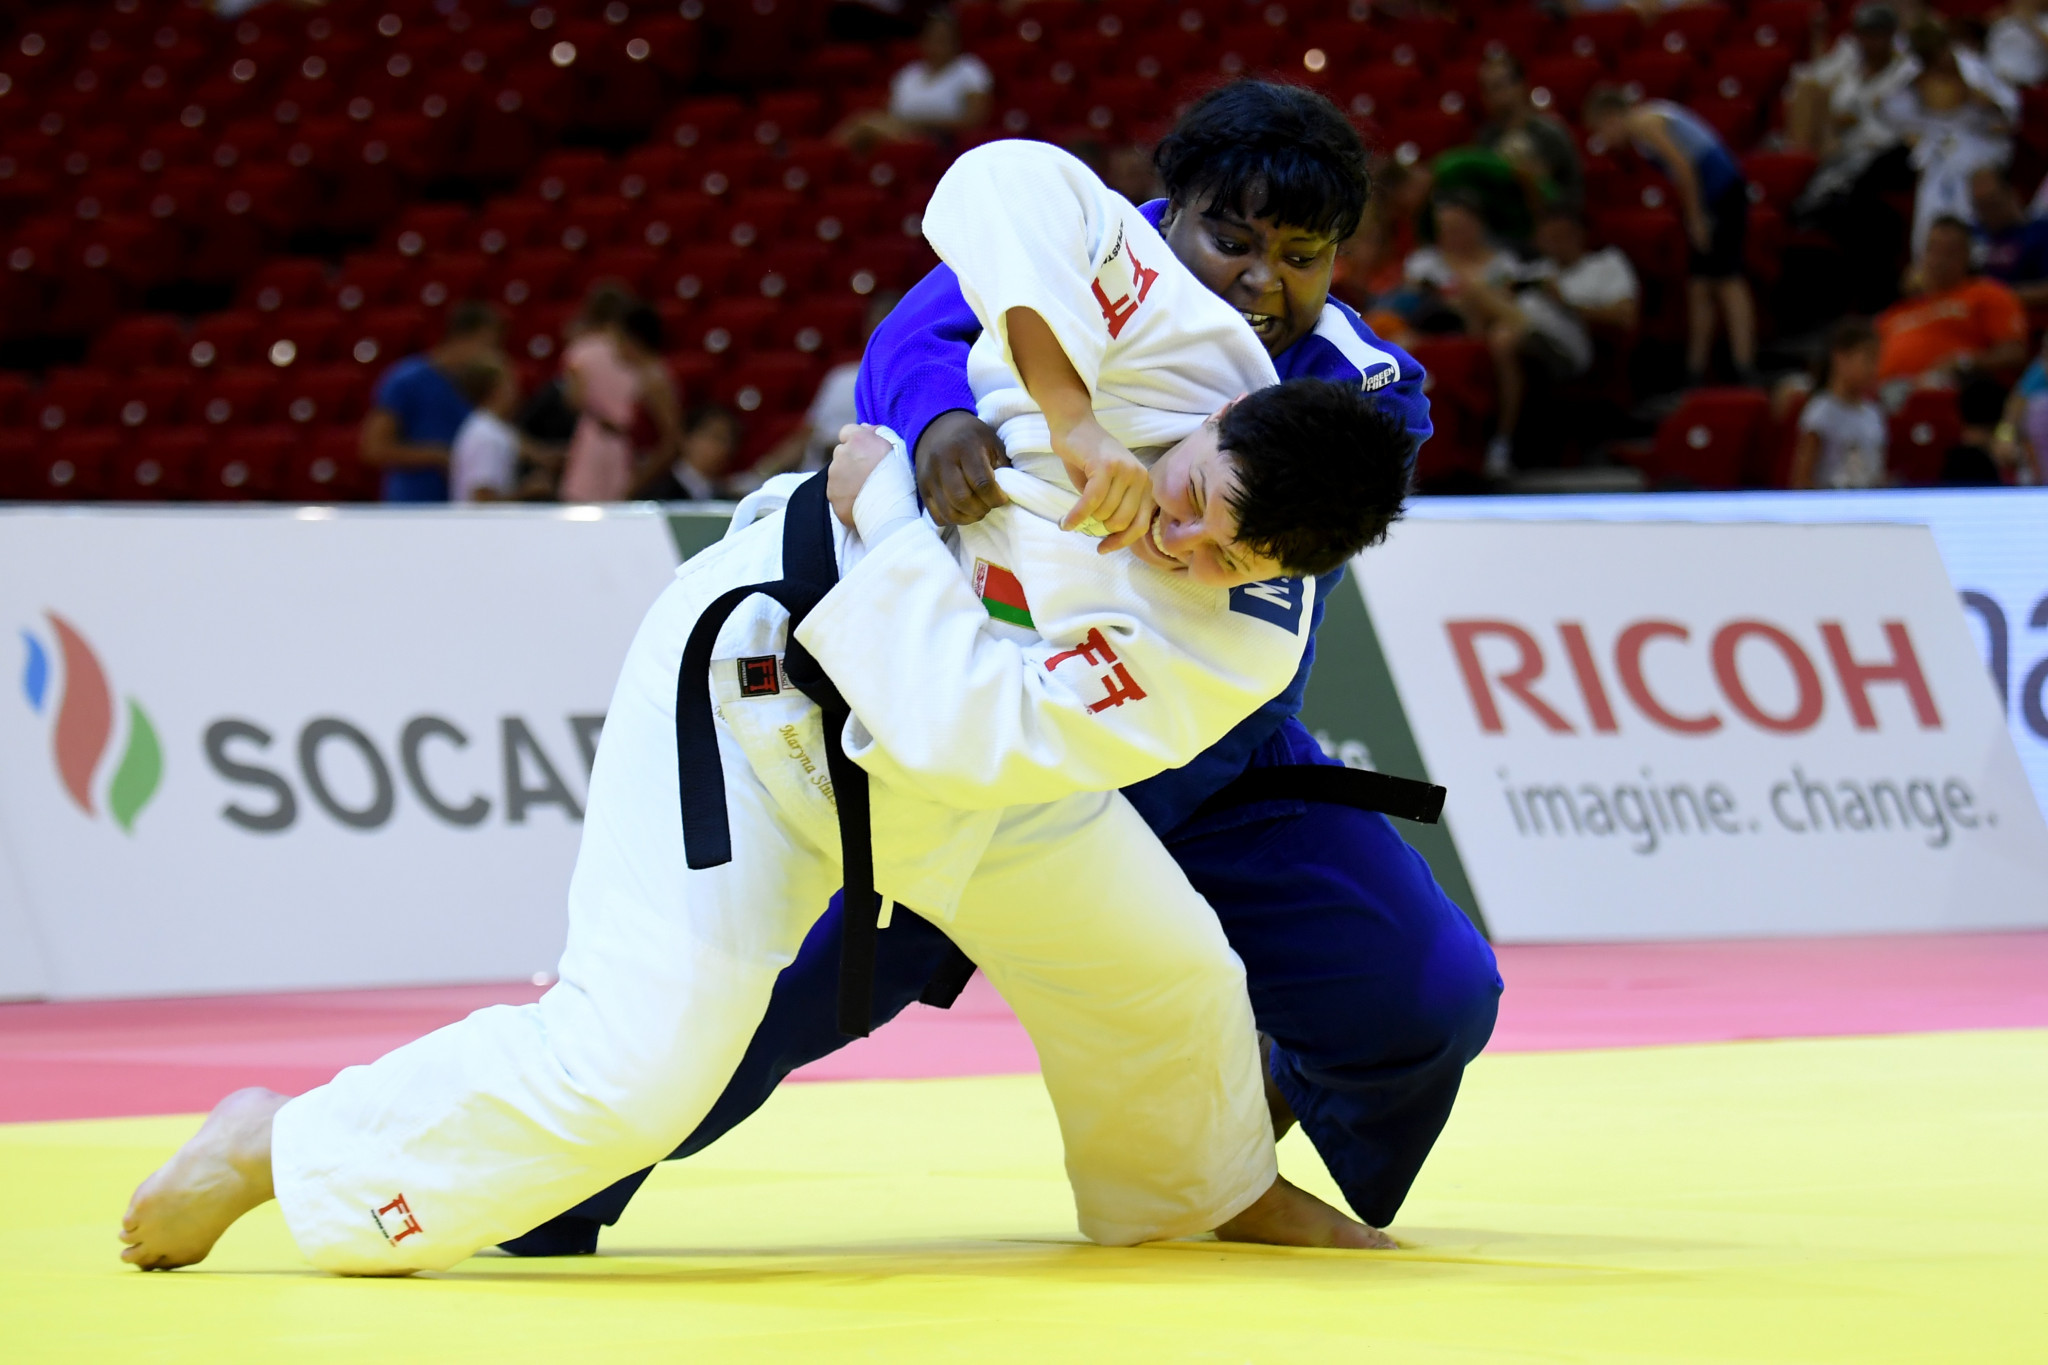 IJF confirms initial World Judo Tour schedule for 2021